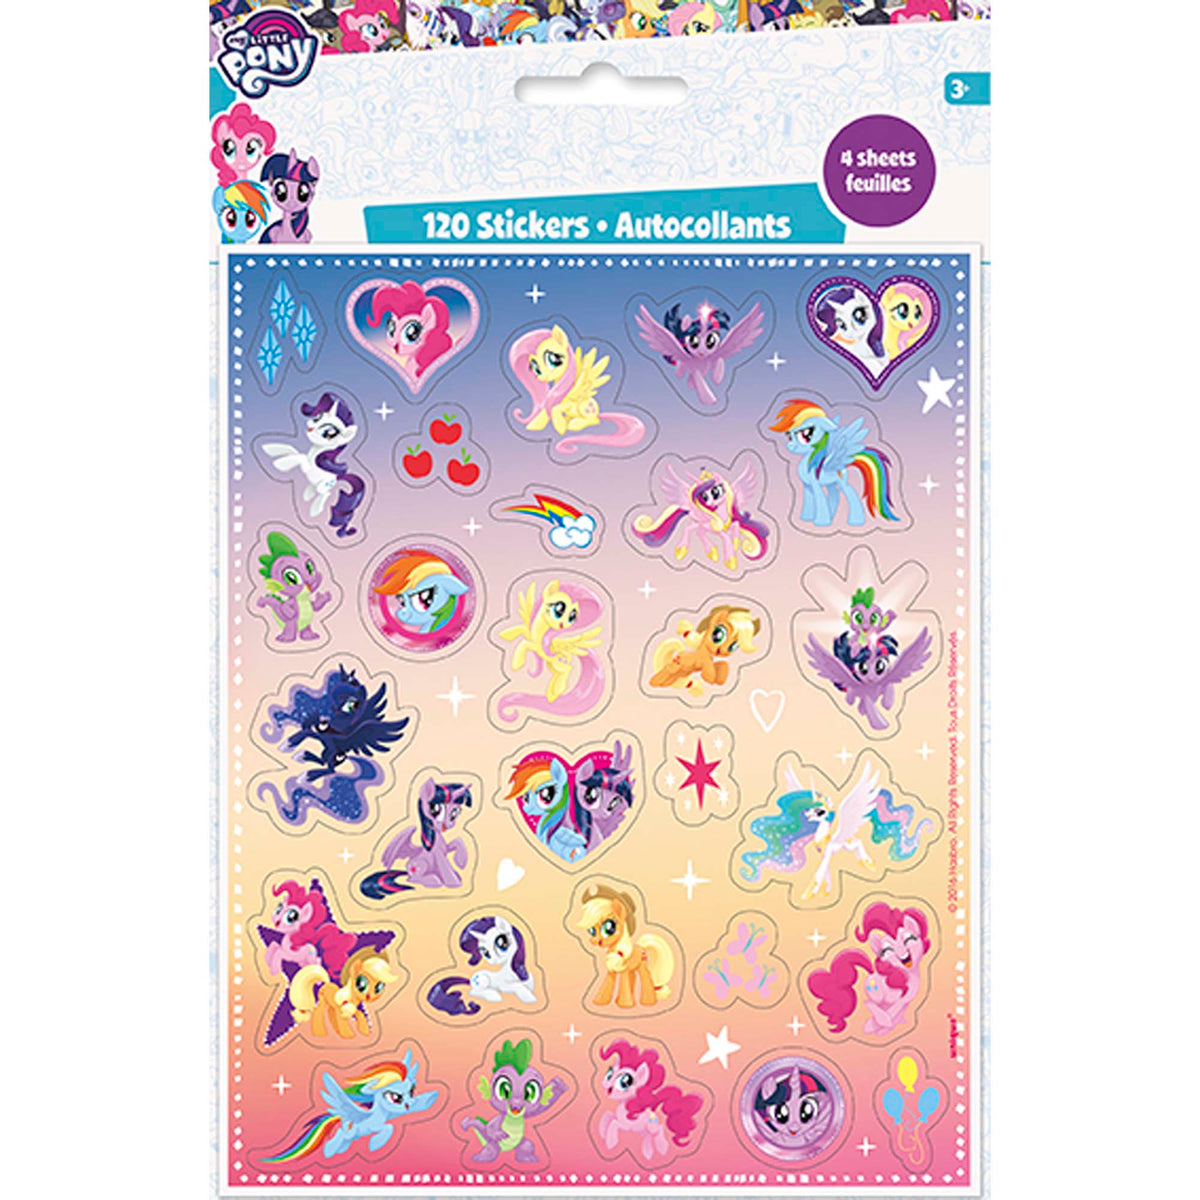 UNIQUE PARTY FAVORS Kids Birthday My Little Pony Sticker Sheets, 4 Count 011179594696